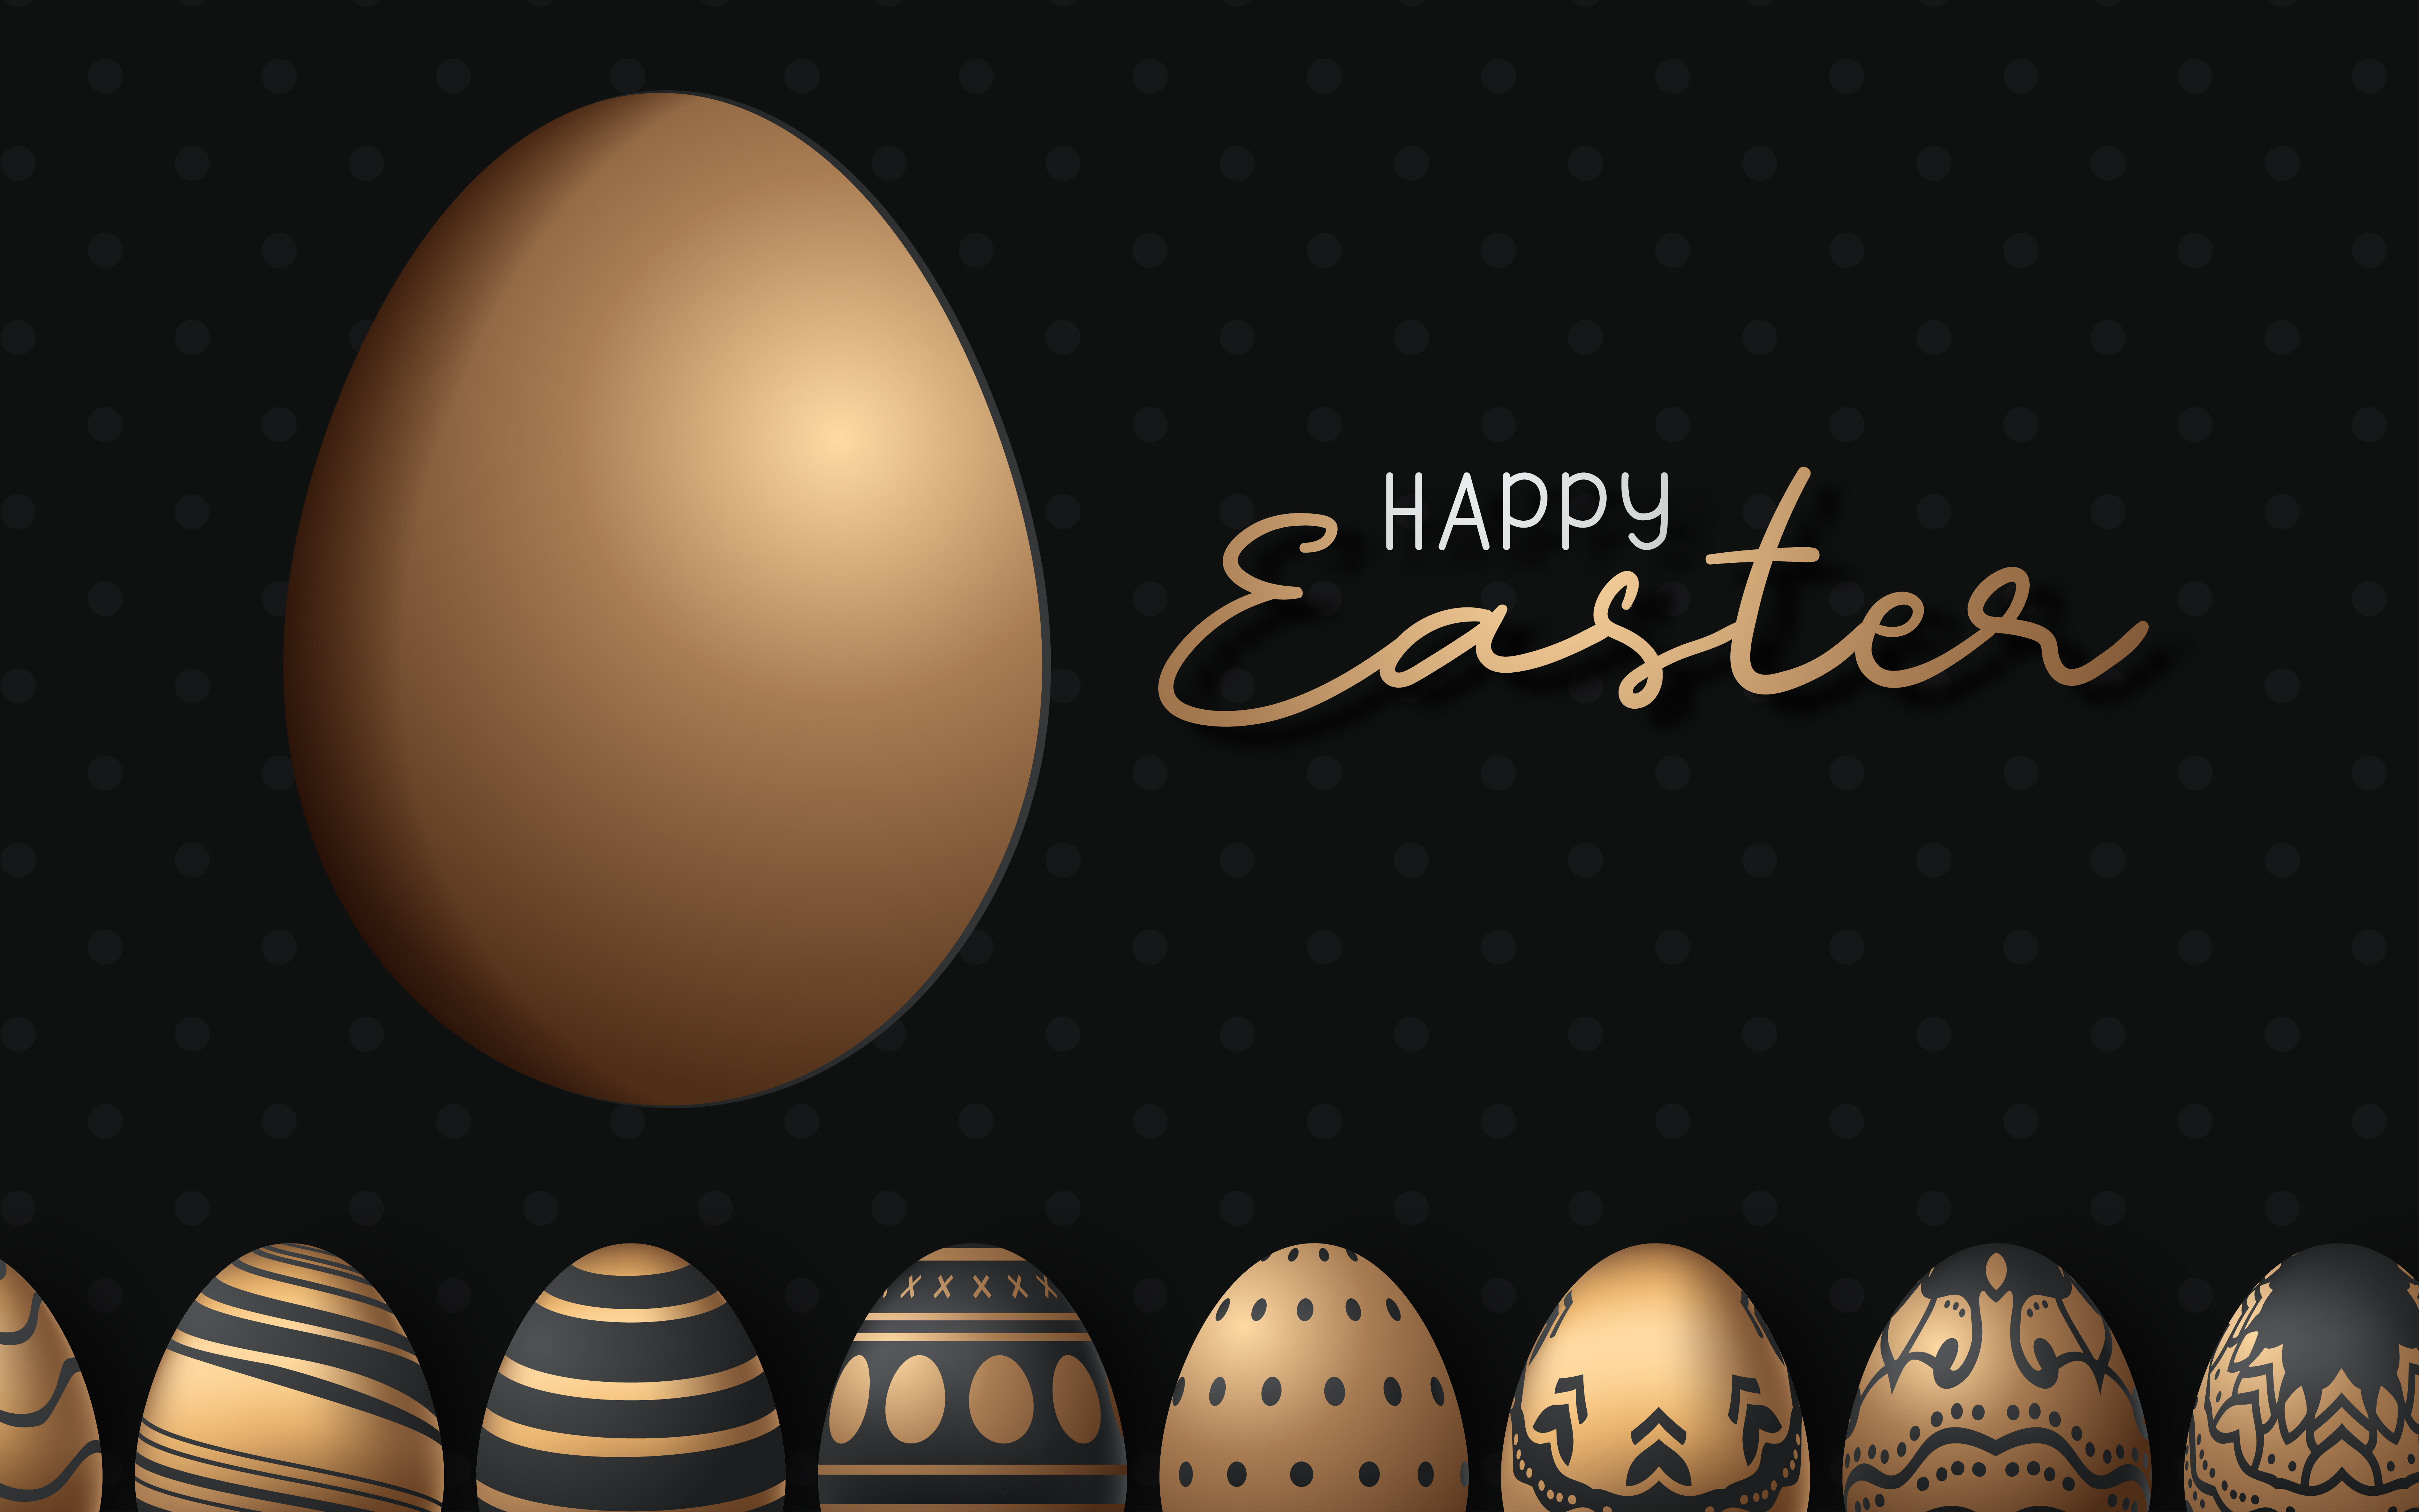 Happy Easter background with realistic Easter egg with large egg design